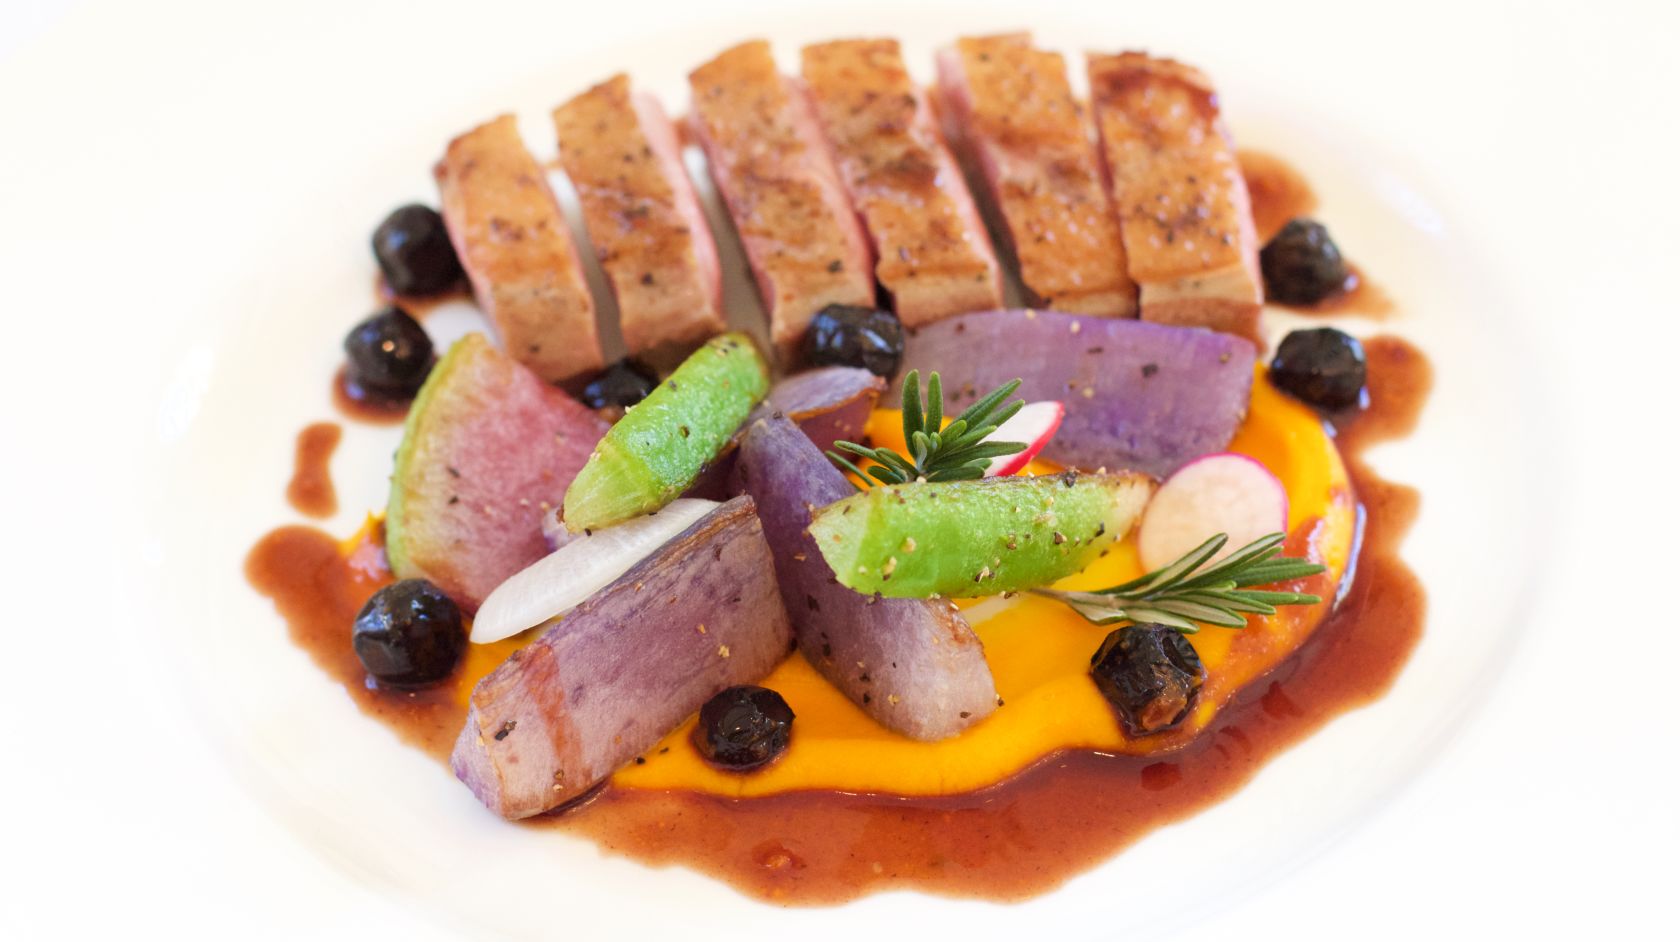 A sliced duck entree on a plate